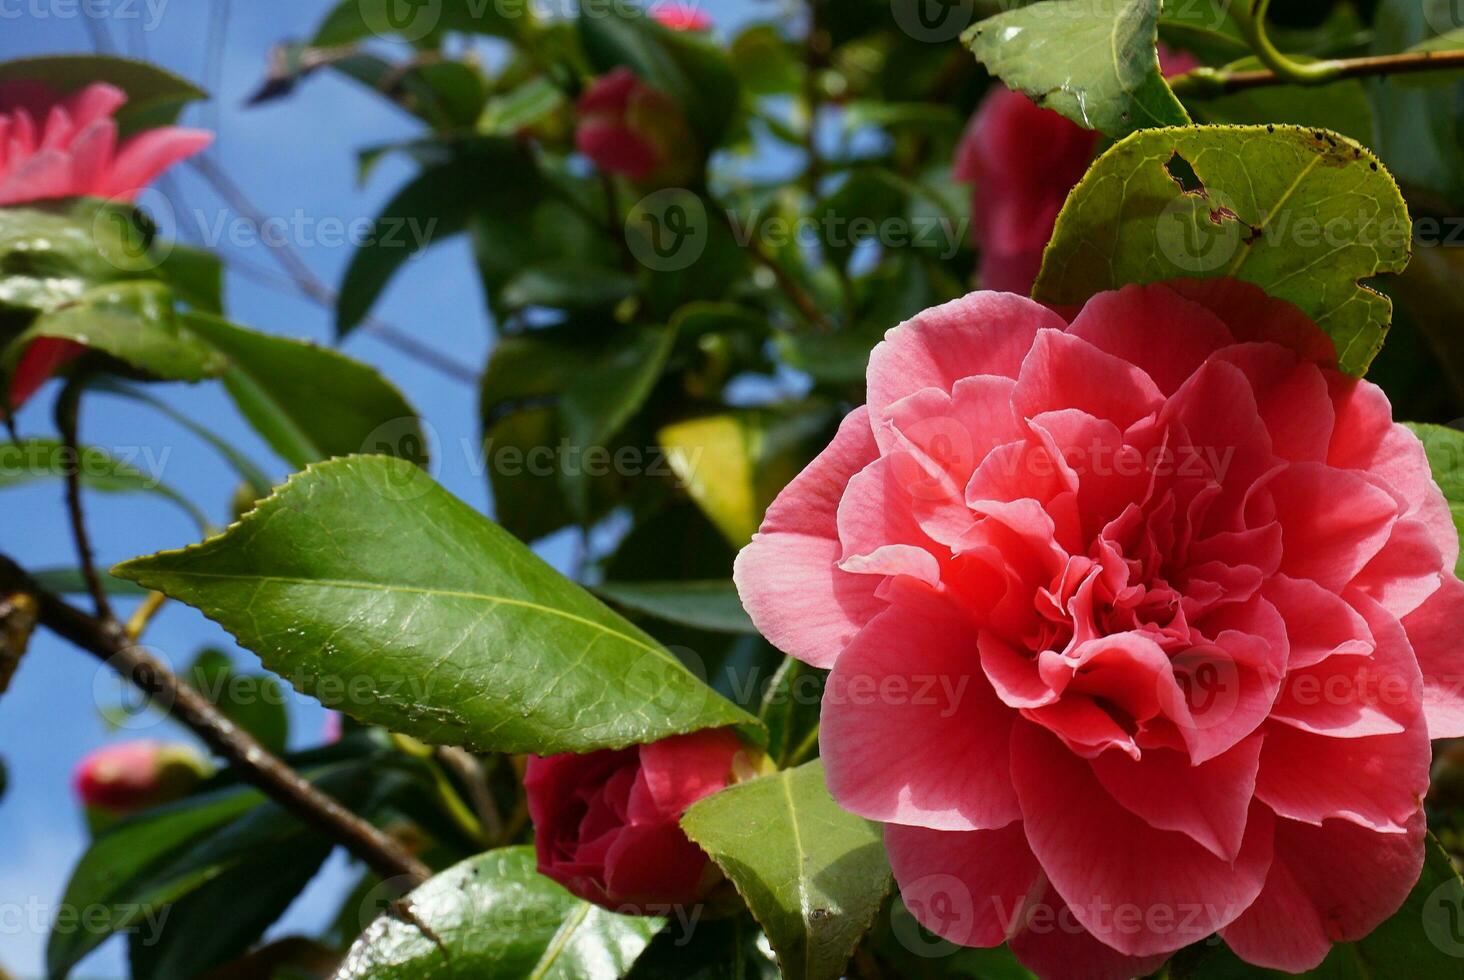 Incredible beautiful red camellia - Camellia japonica, known as common camellia or Japanese camellia. photo